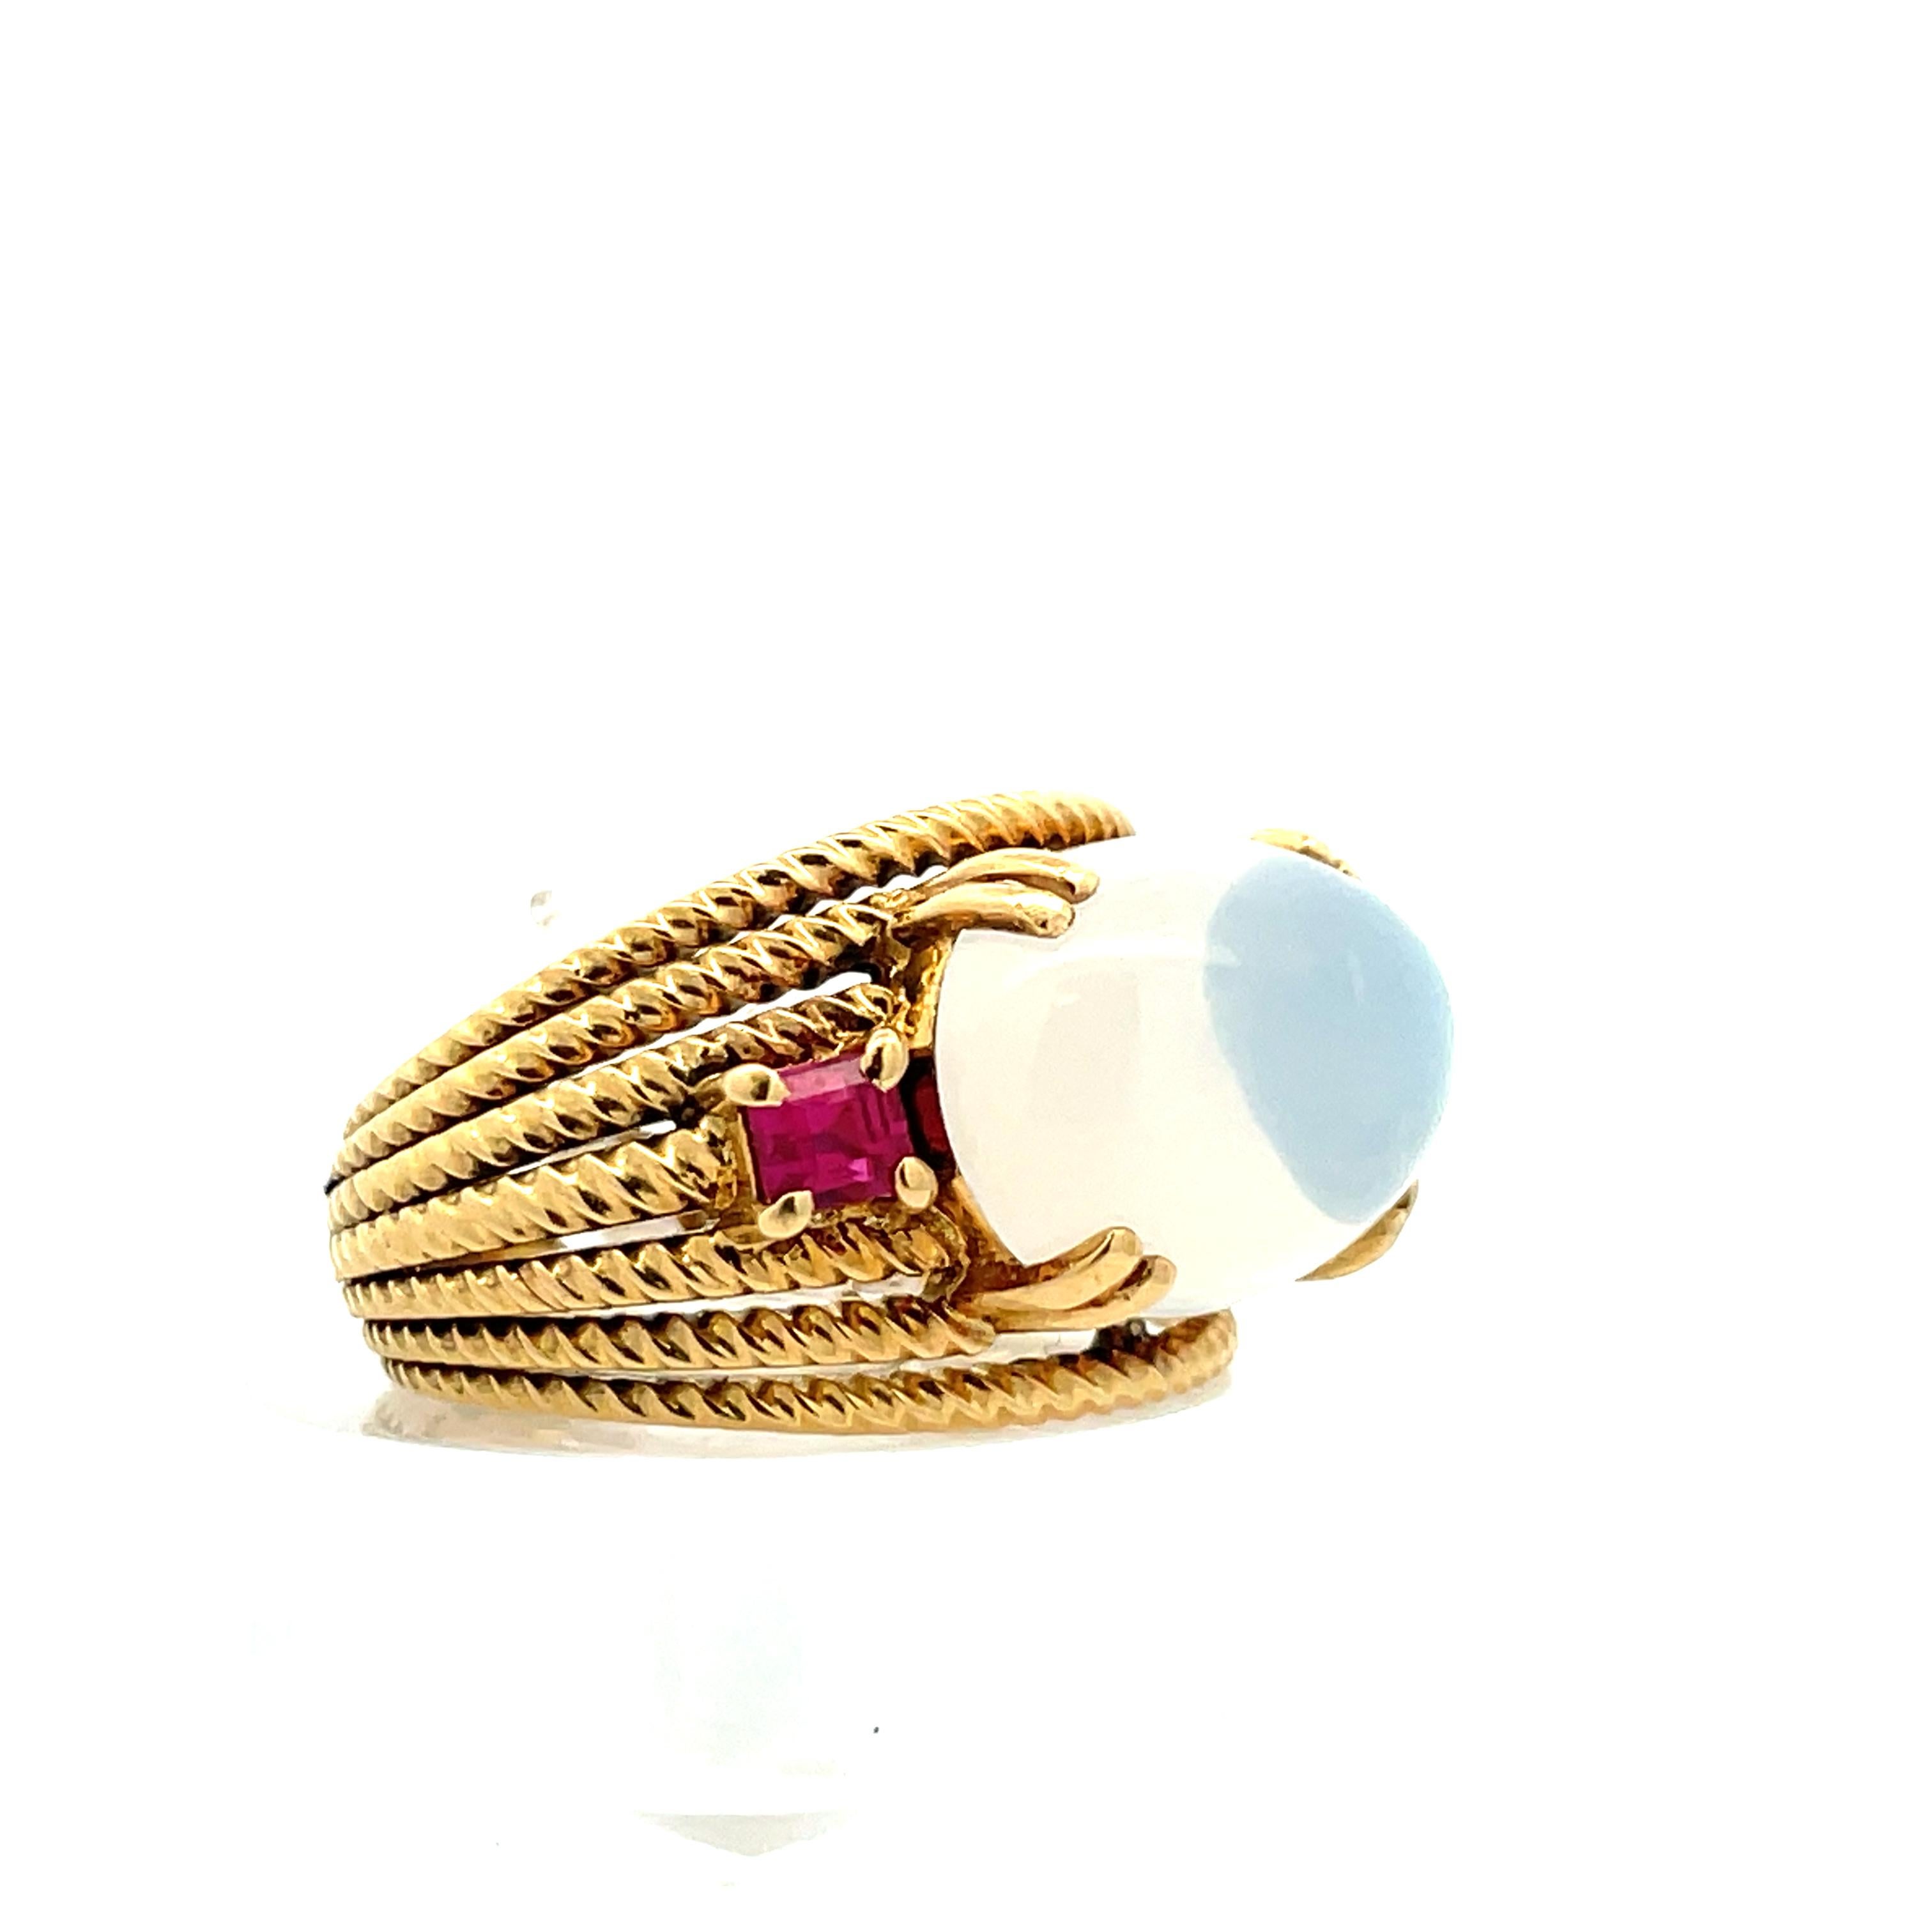 This beautiful 18k yellow gold ring is contemporary-design handmade with moonstone and rich red
rubies. The 18k yellow gold rope design bands are stacked and raised, effortlessly displaying the
moonstone and ruby, making the details of the ring